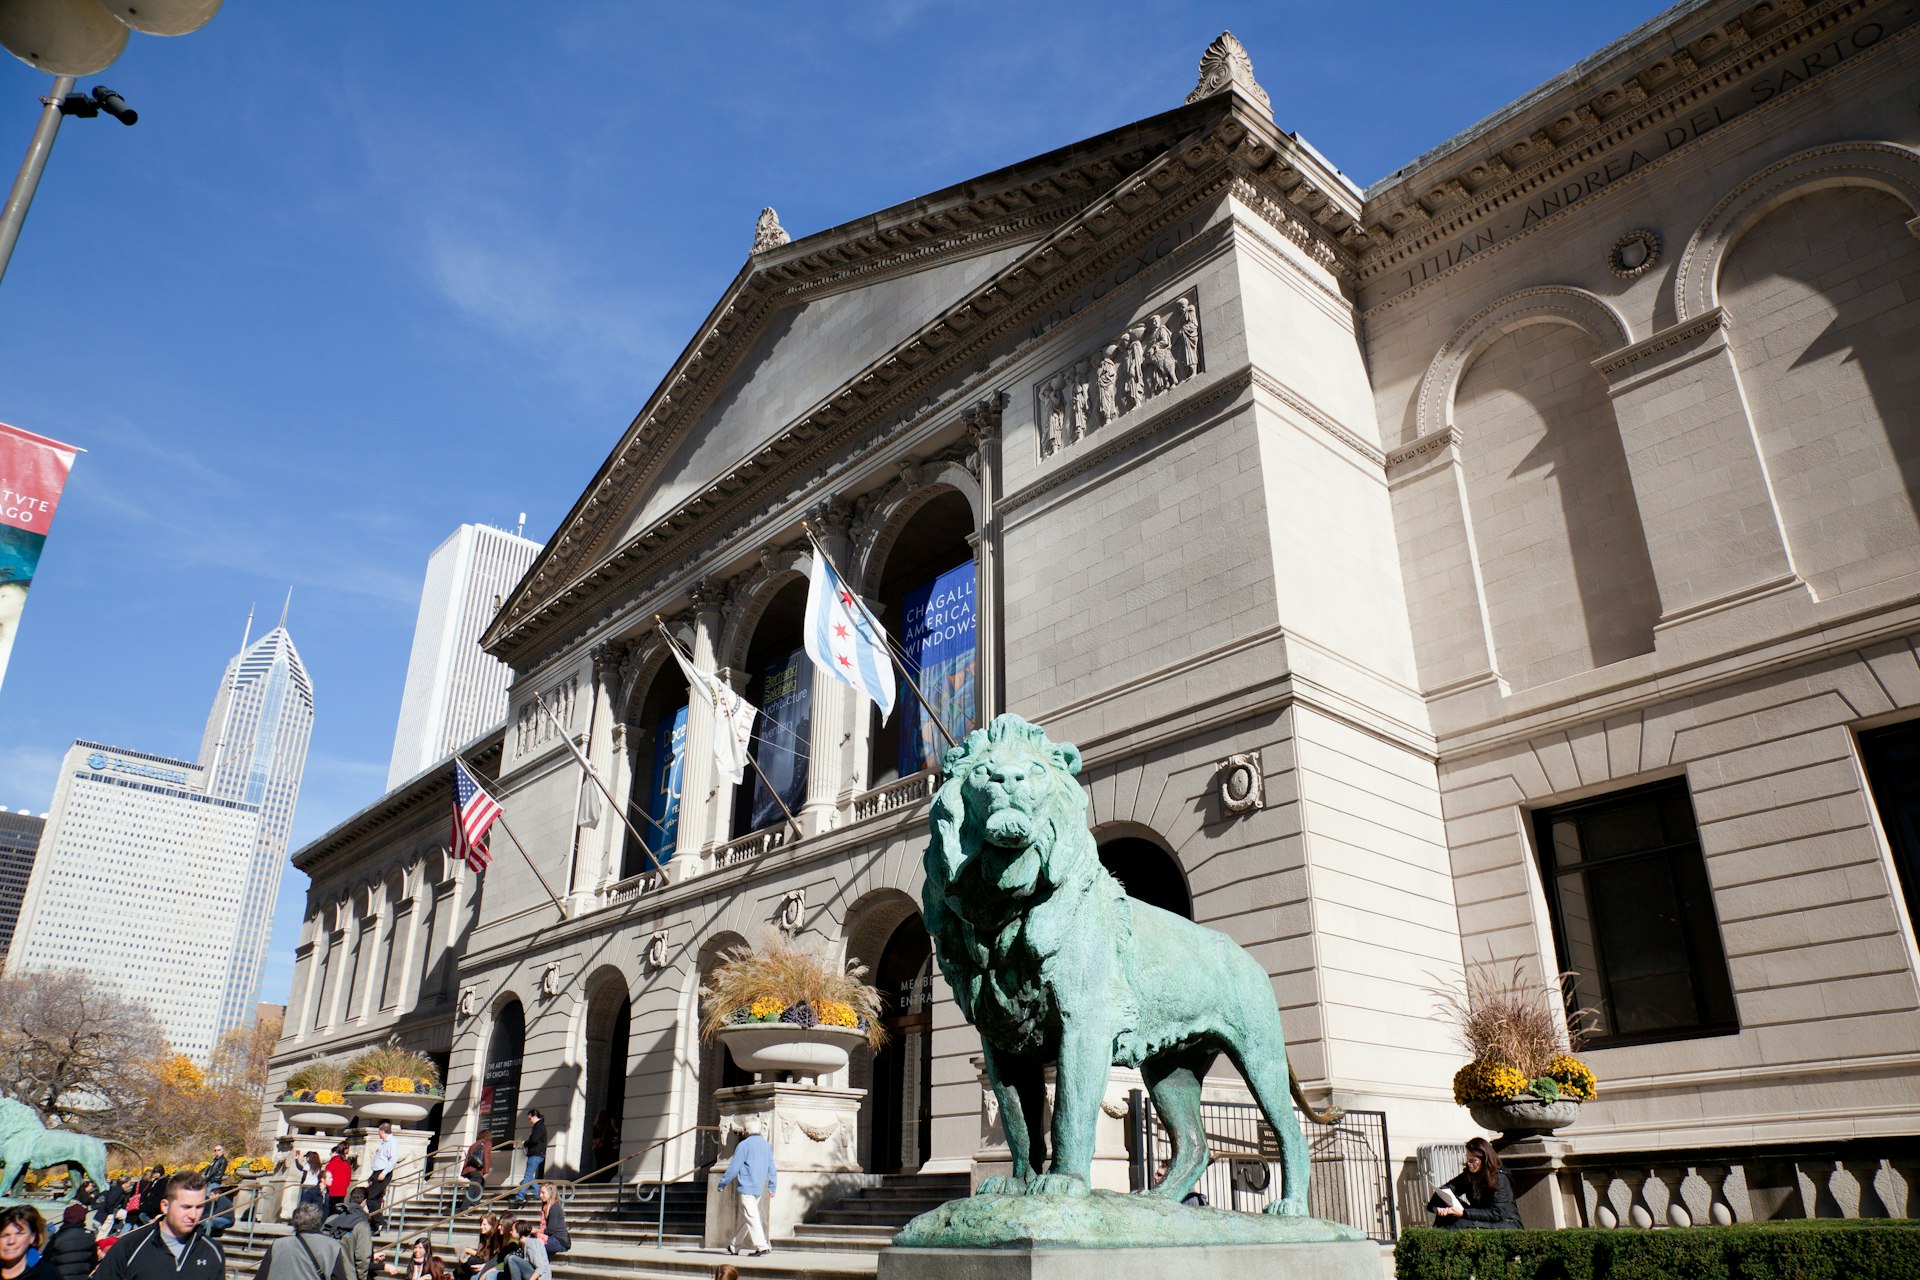 An oxidized lion statue stands in front of the Art Institute of Chicago building, whose facade rises in the background; perfect weekend in Chicago